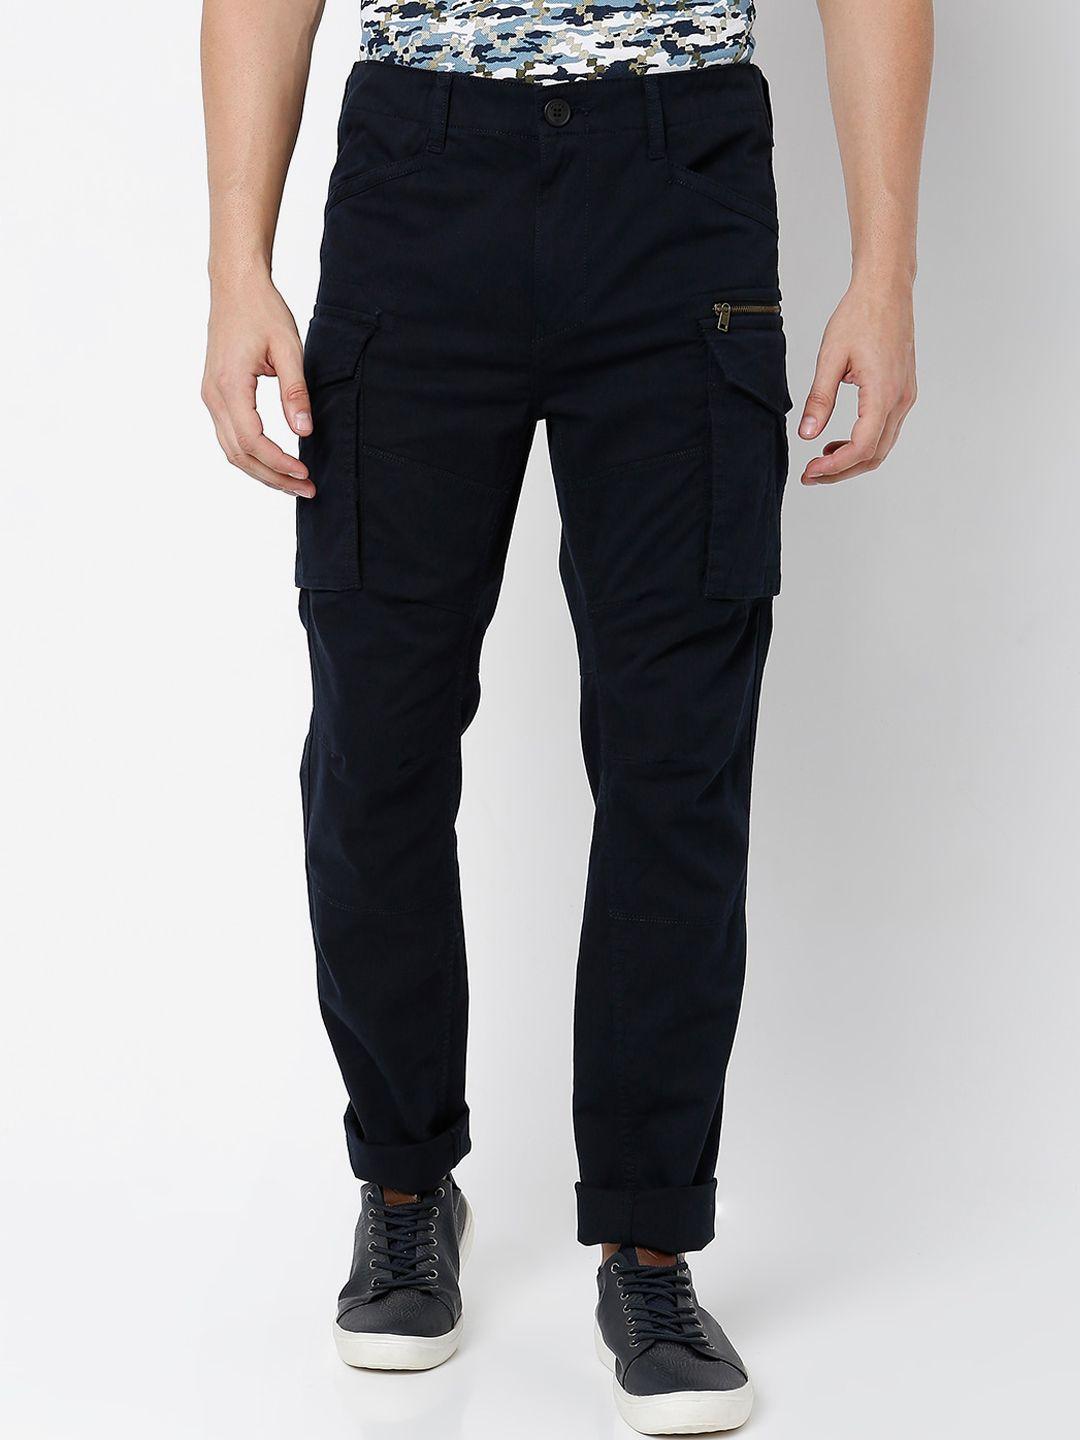 mufti-men-navy-blue-relaxed-loose-fit-cargos-trousers